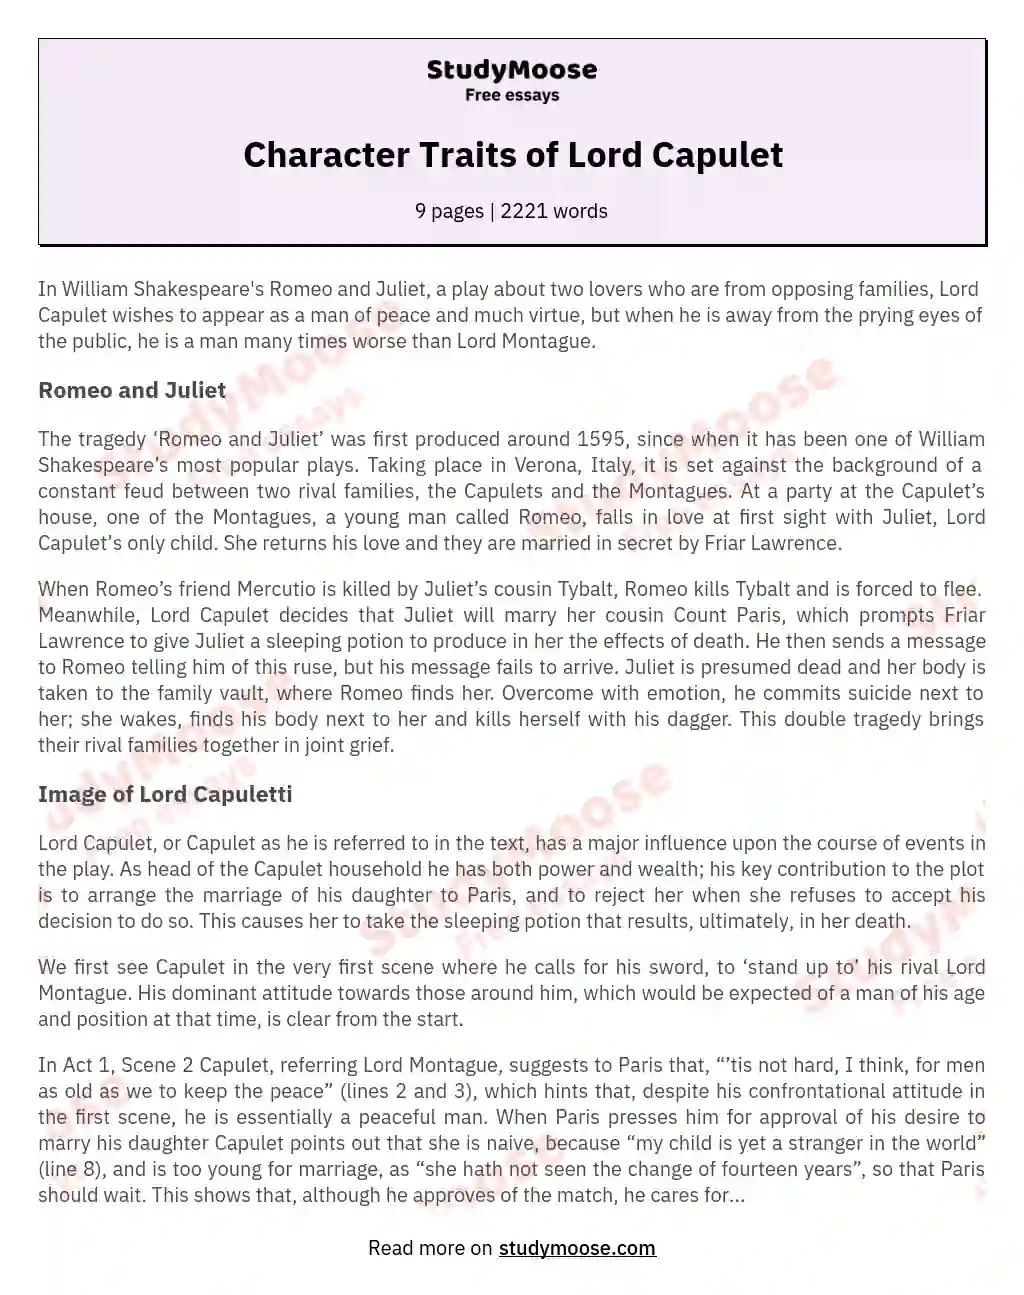 Character Traits of Lord Capulet